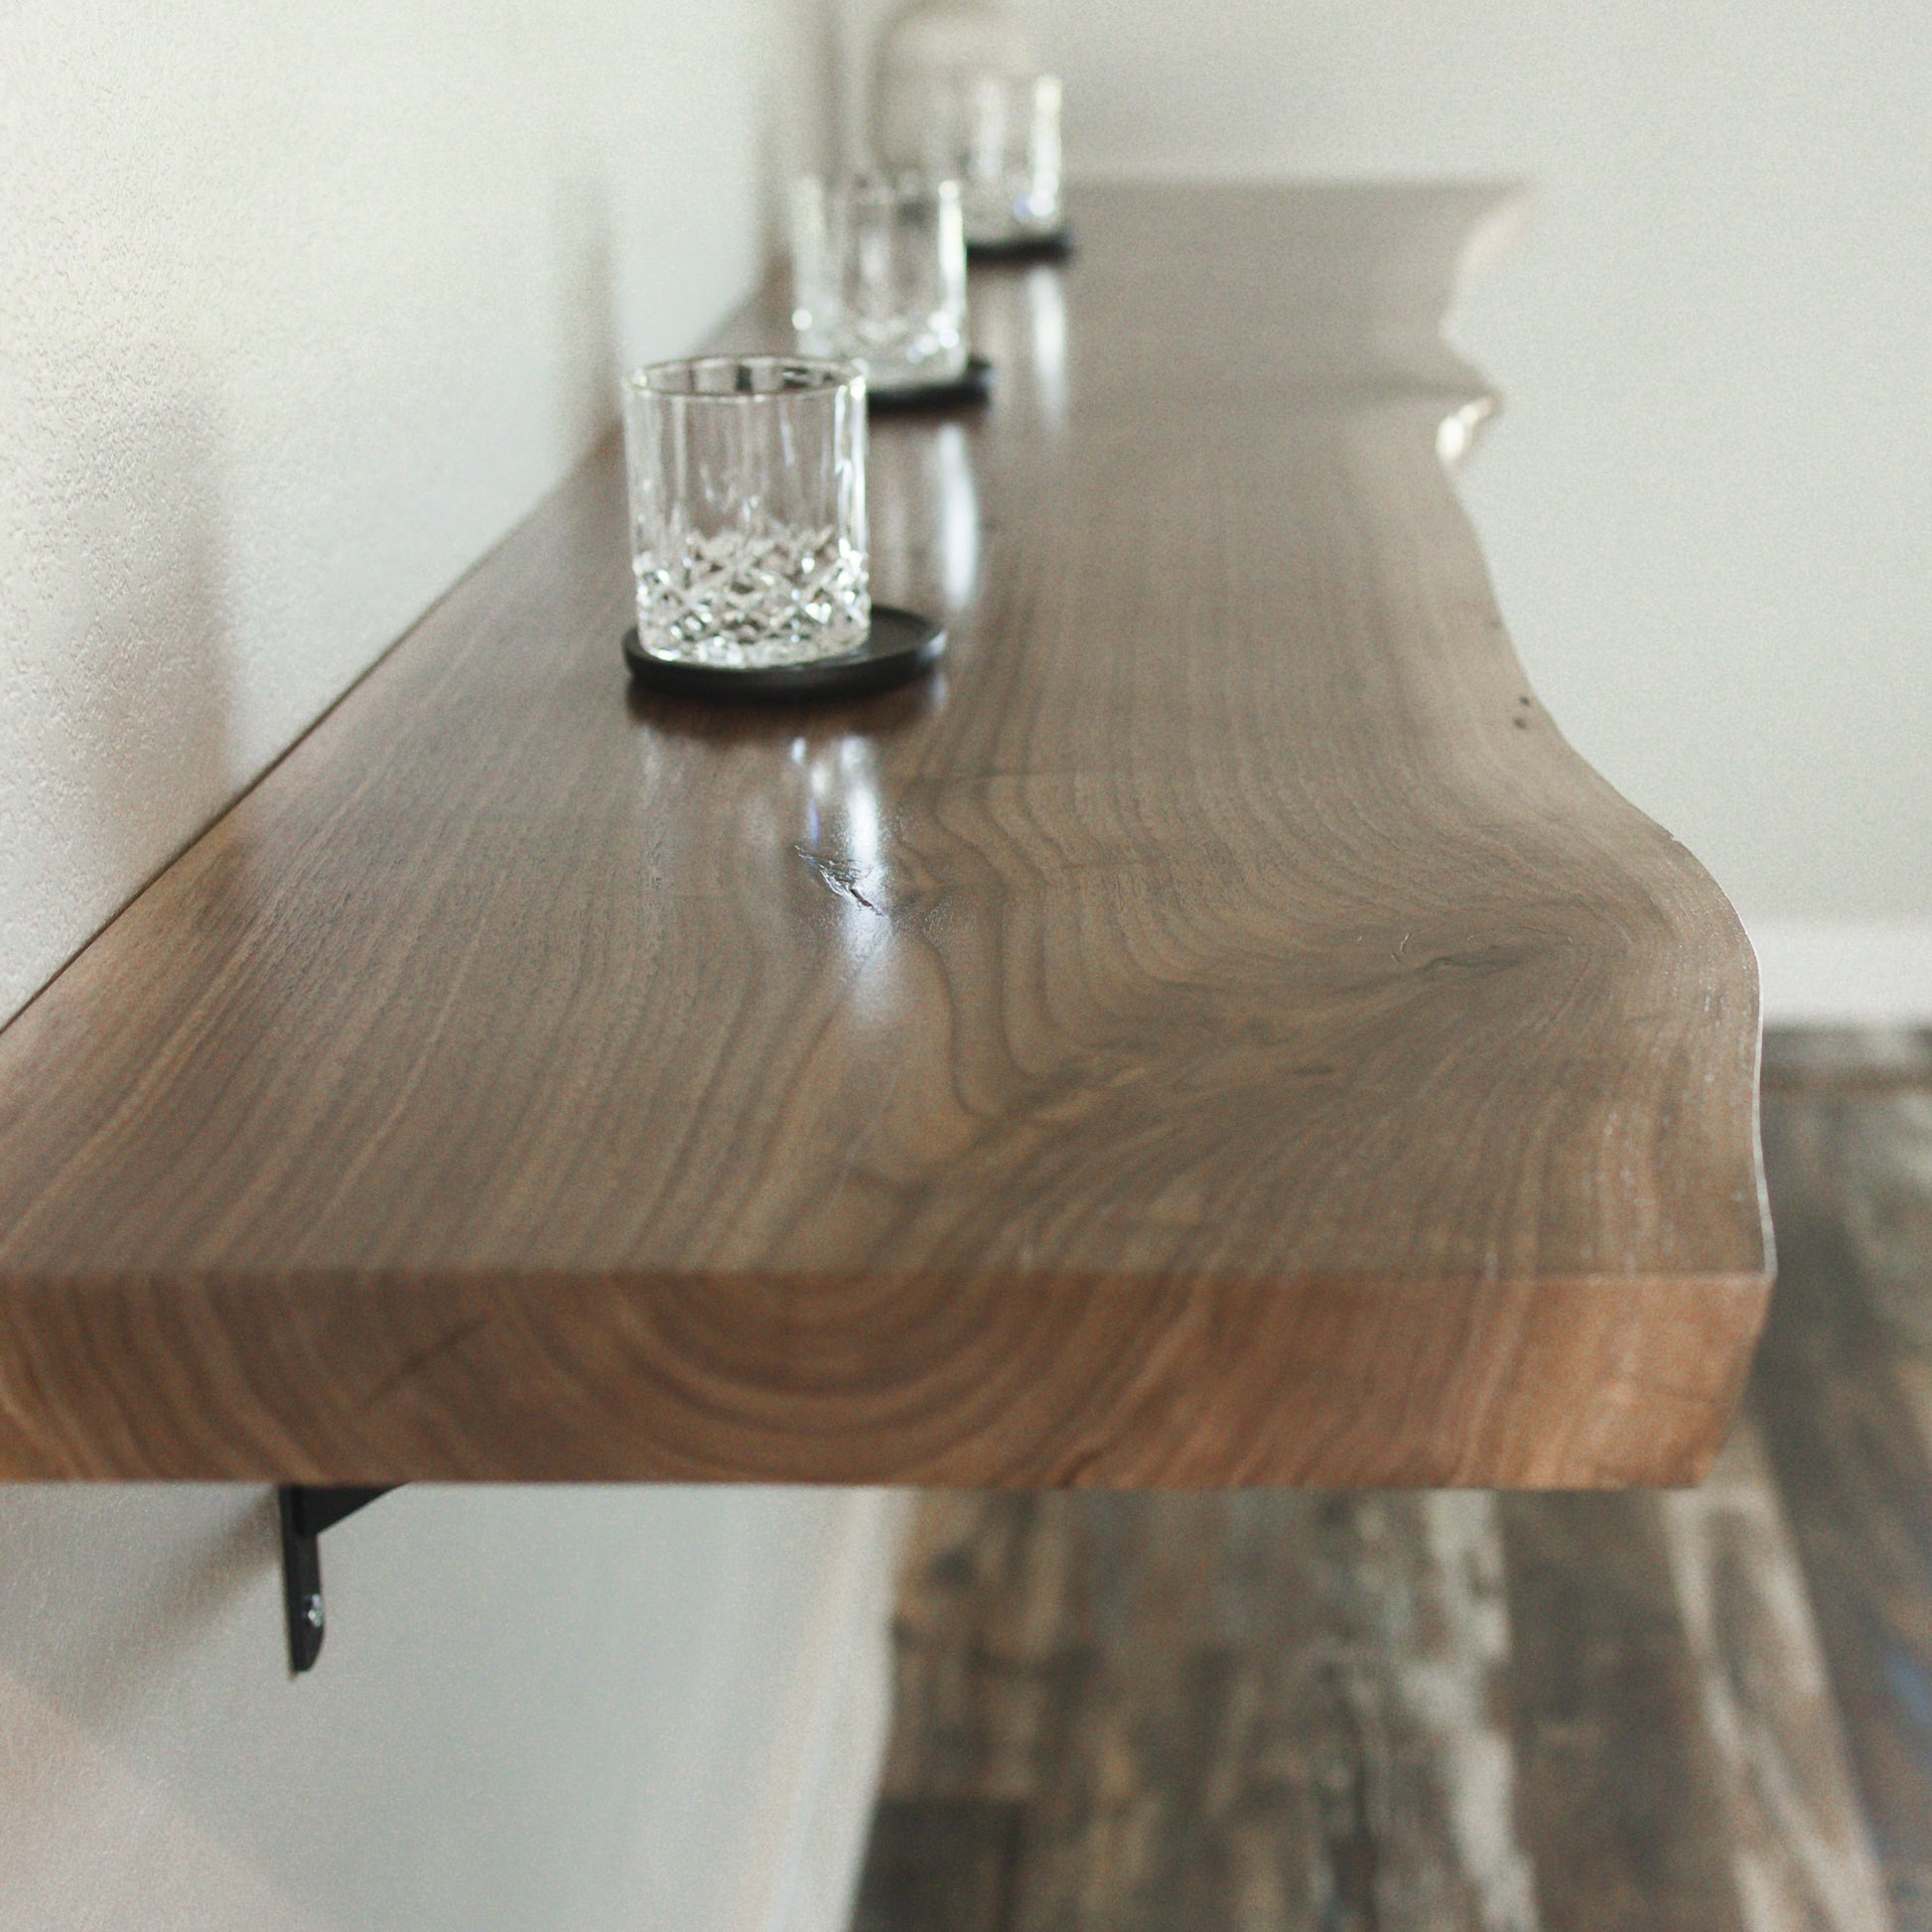 The Live Edge Walnut Floating Bar Table - FargoWoodworks